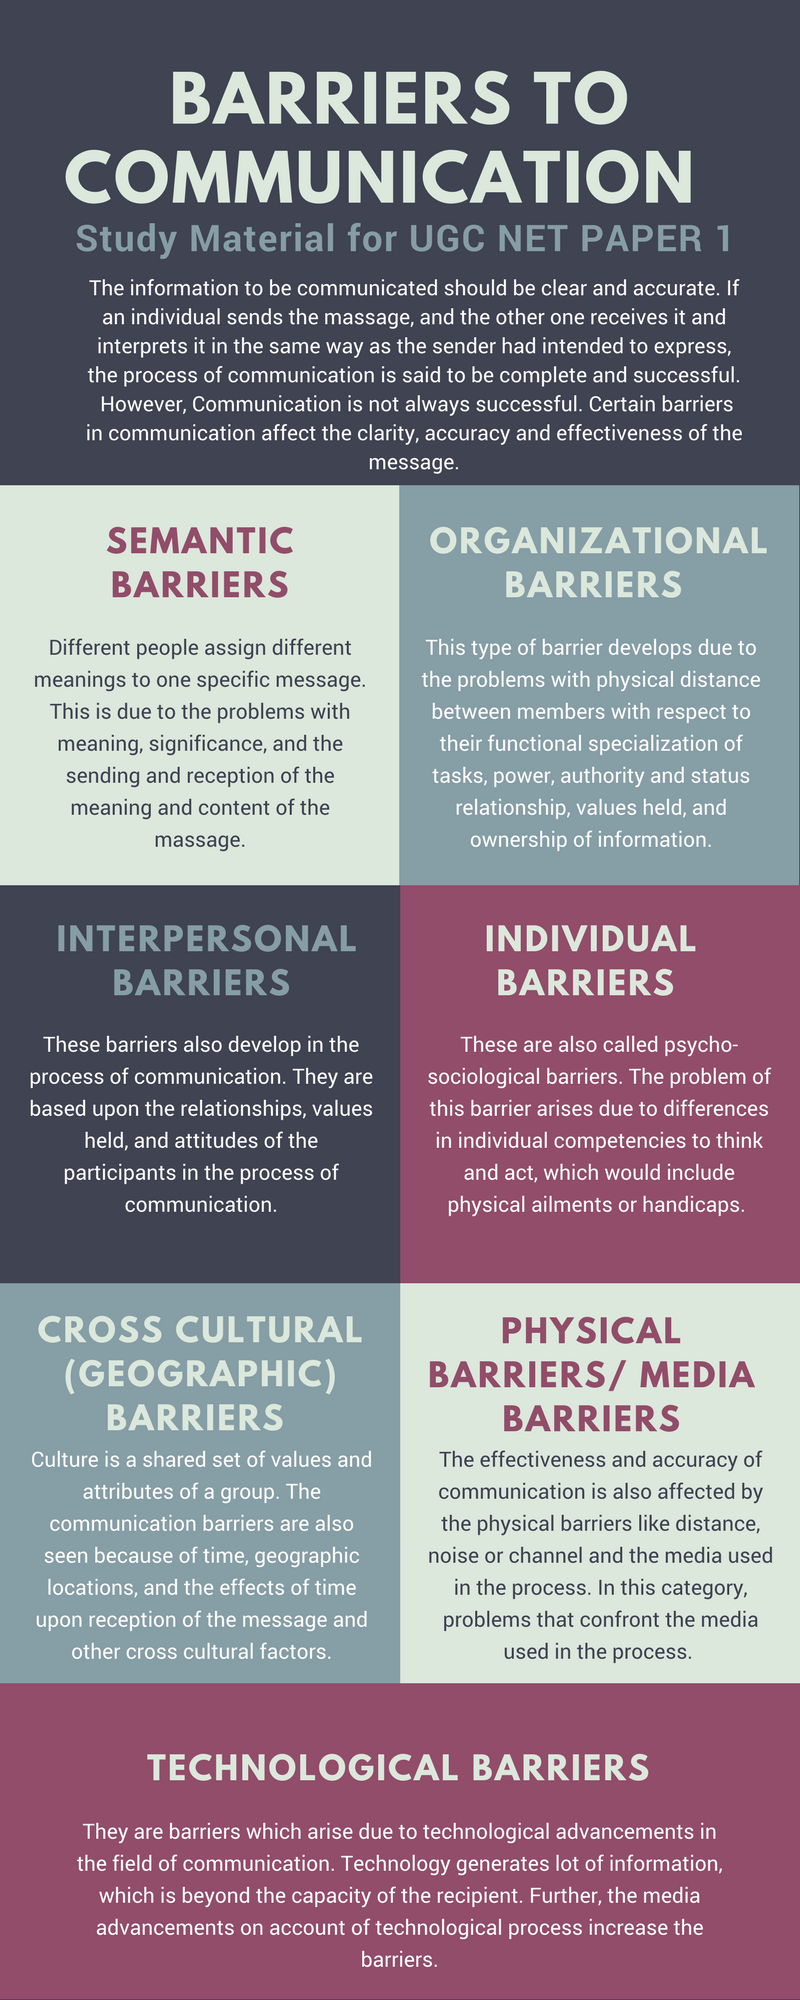 BARRIERS TO COMMUNICATION